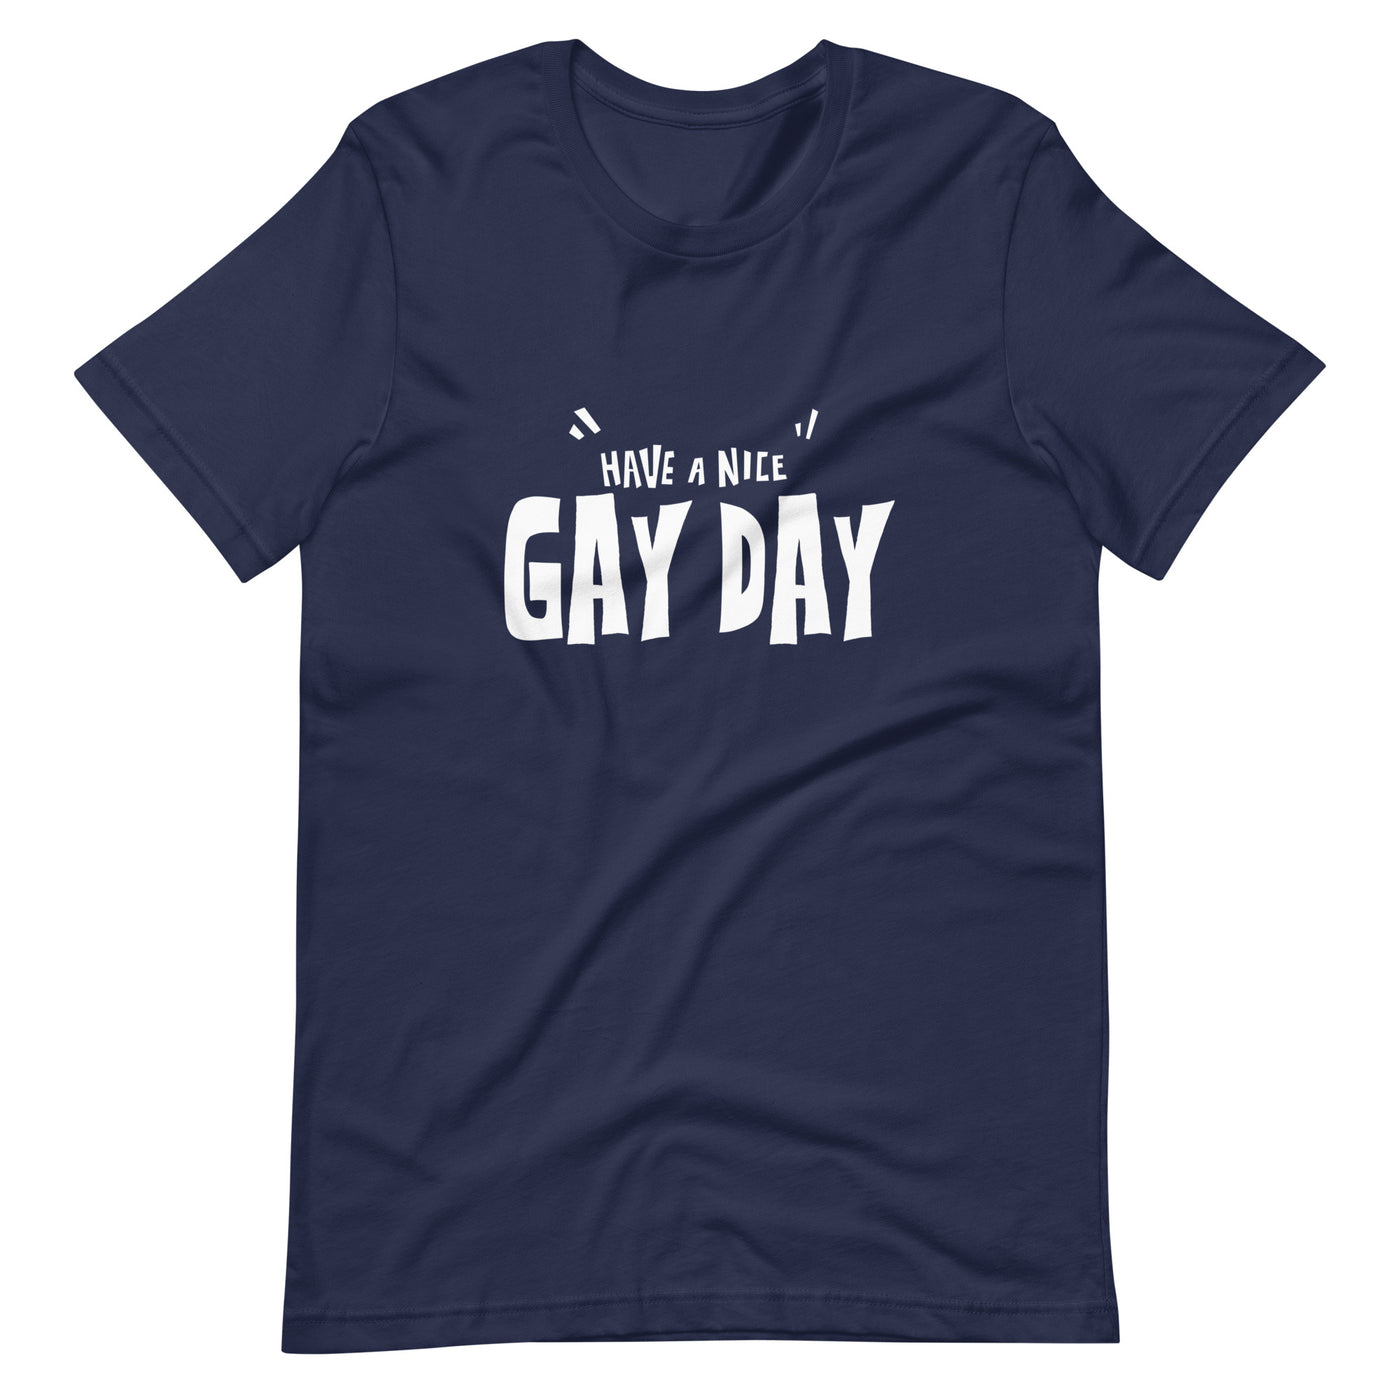 Pride Clothes - Live Out Loud Have a Nice Gay Day Pride Things TShirt - Navy